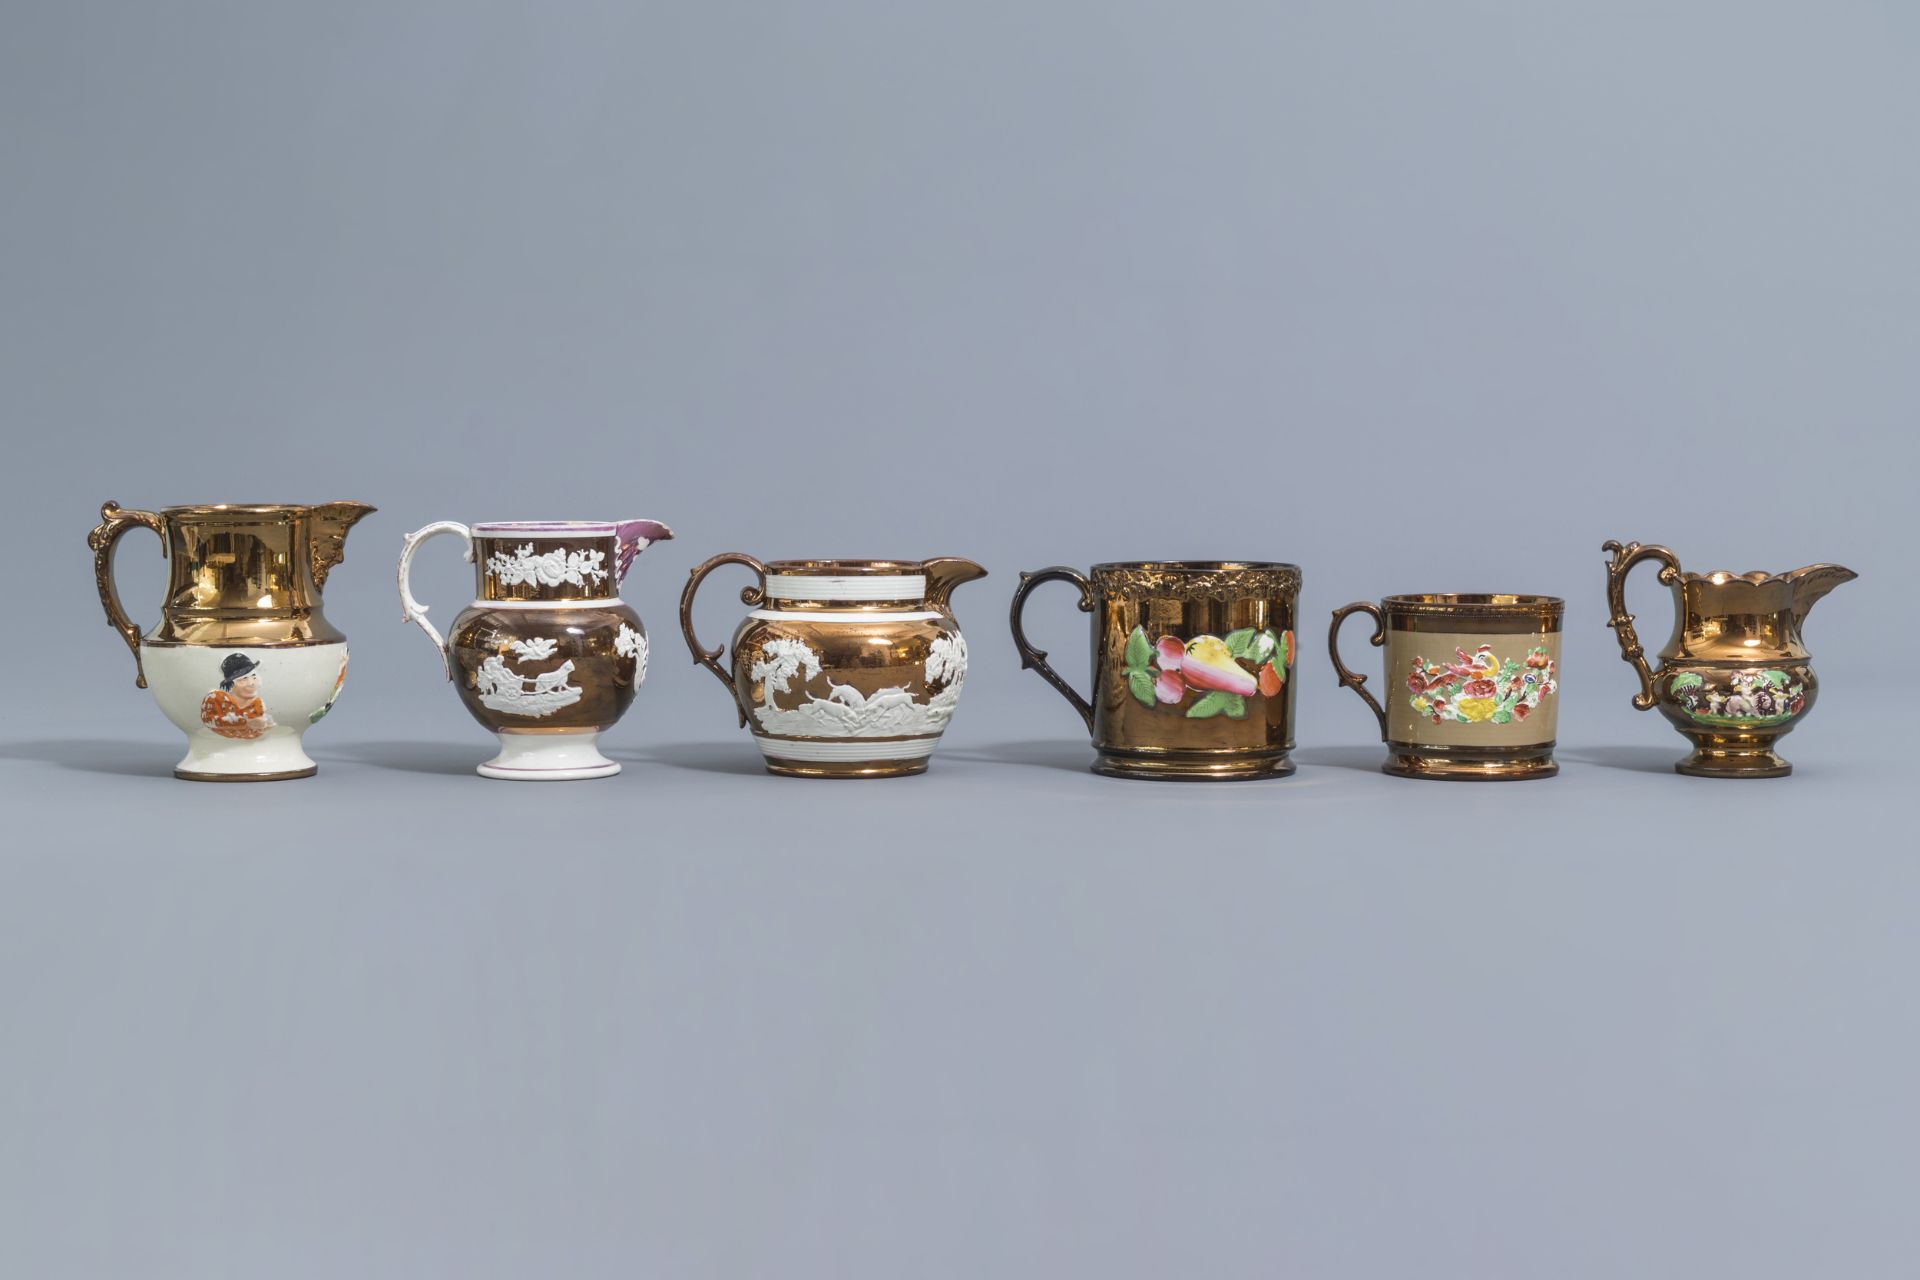 A varied collection of English lustreware items with relief design, 19th C. - Image 39 of 50